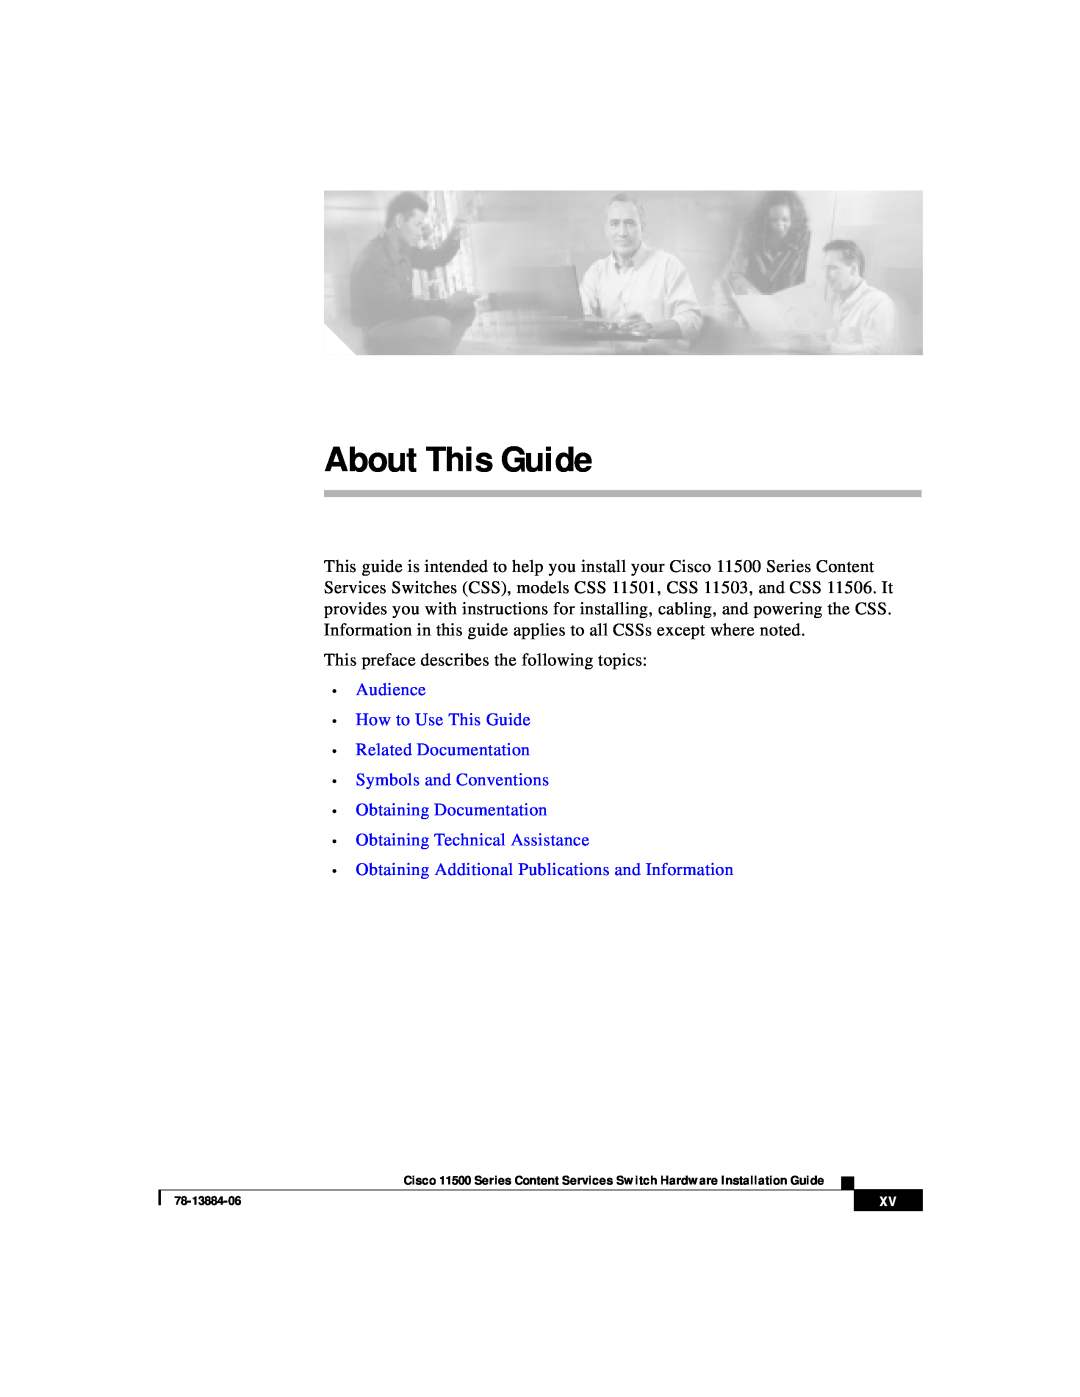 Cisco Systems 11500 Series manual About This Guide, Audience How to Use This Guide Related Documentation 